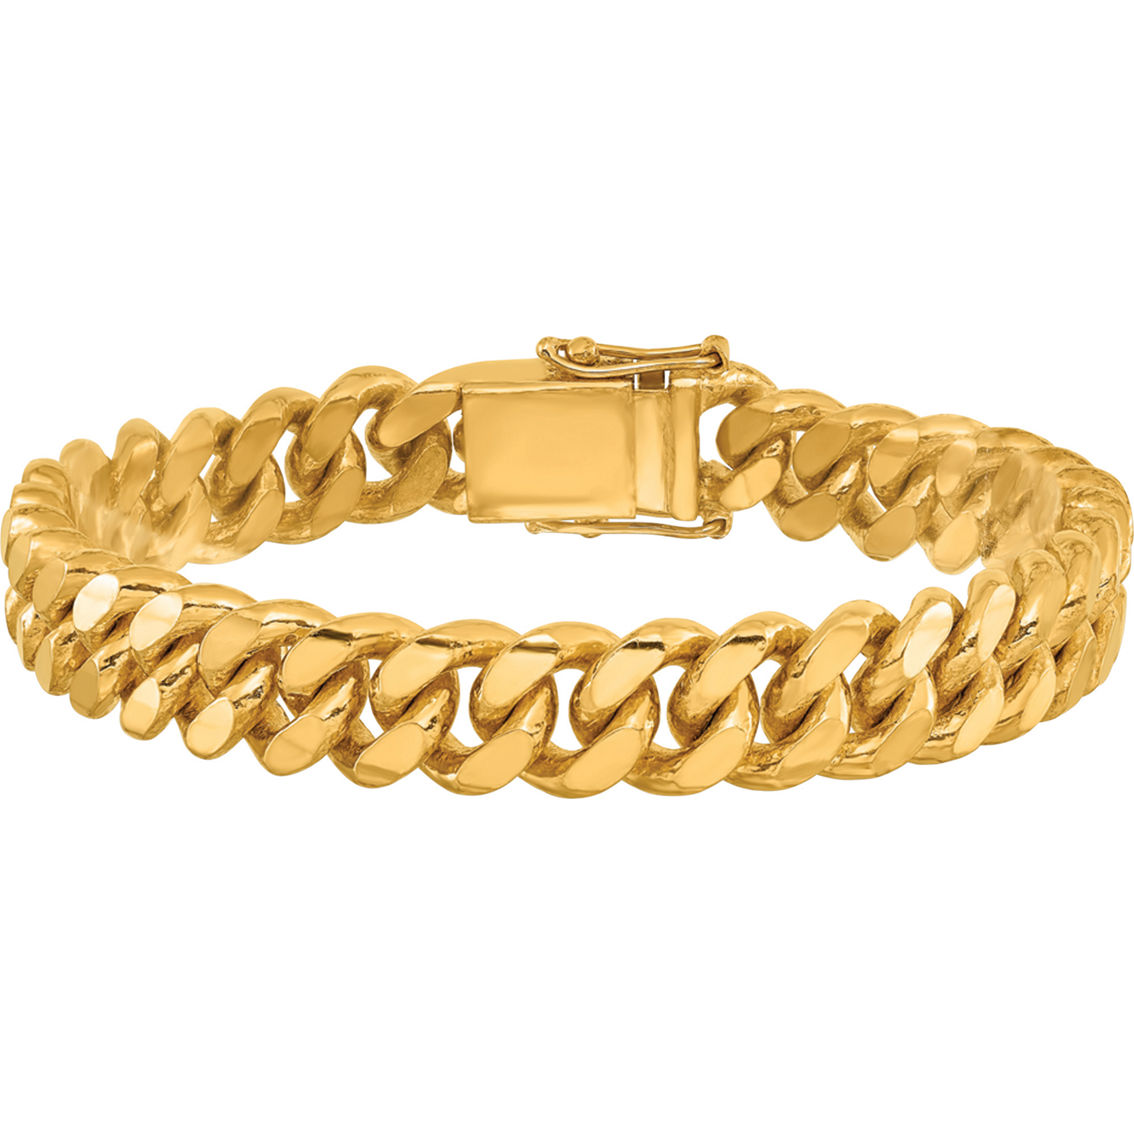 24K Pure Gold 24K Yellow Gold 12mm Solid Curb 8.5 in. Chain Bracelet - Image 2 of 5